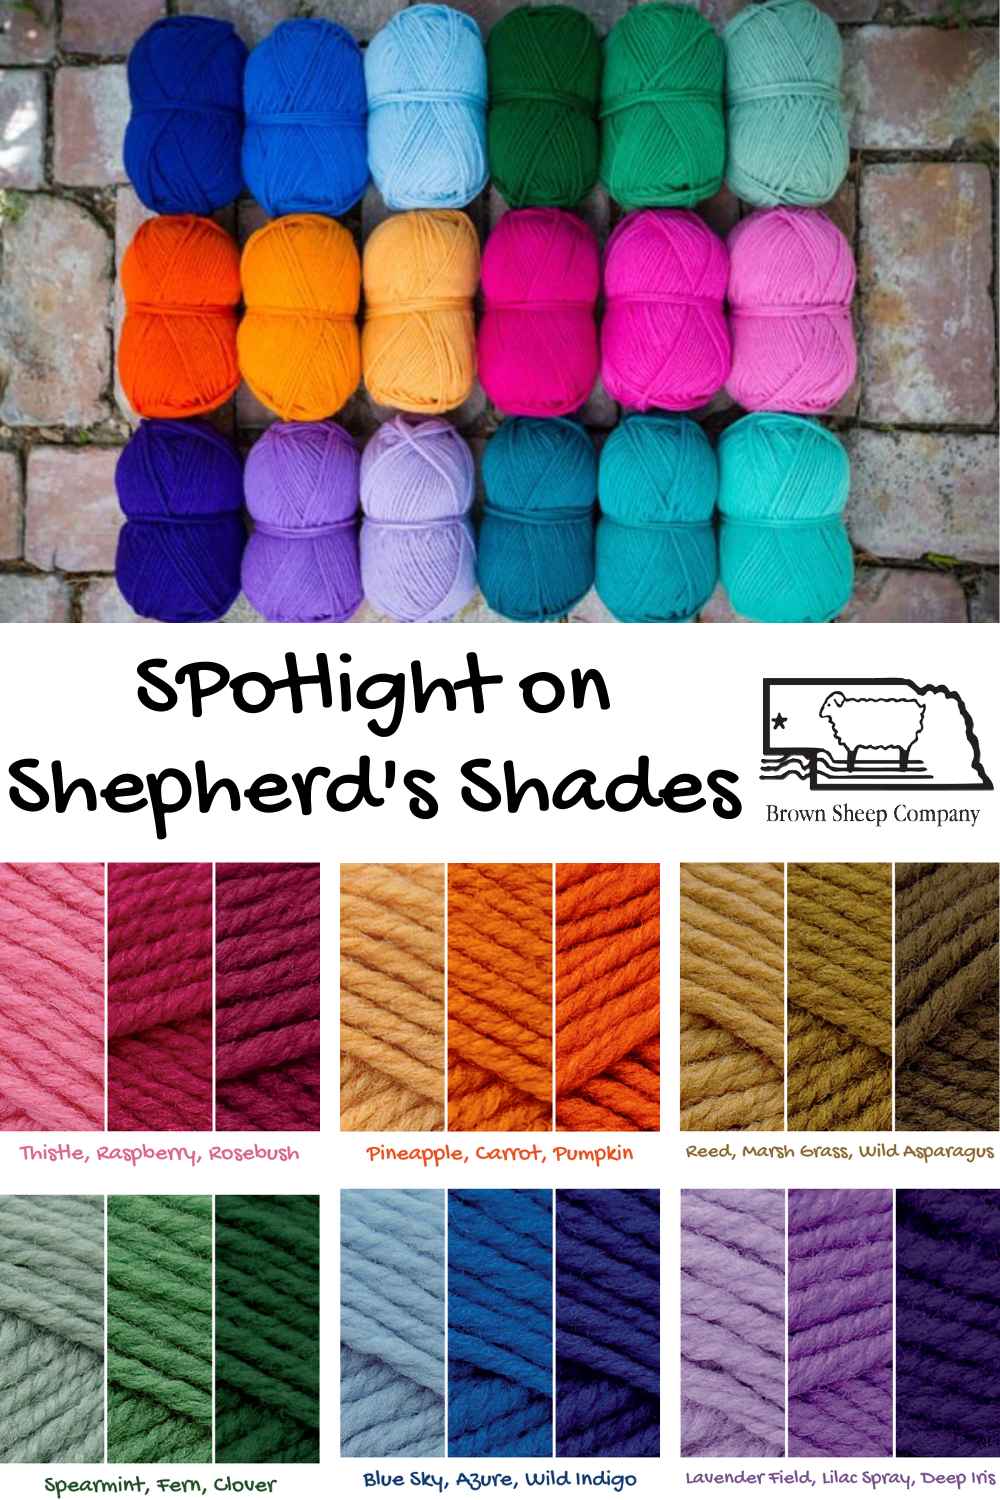 Shepherd's Shades Pin Image illustrating breadth of gradient colors